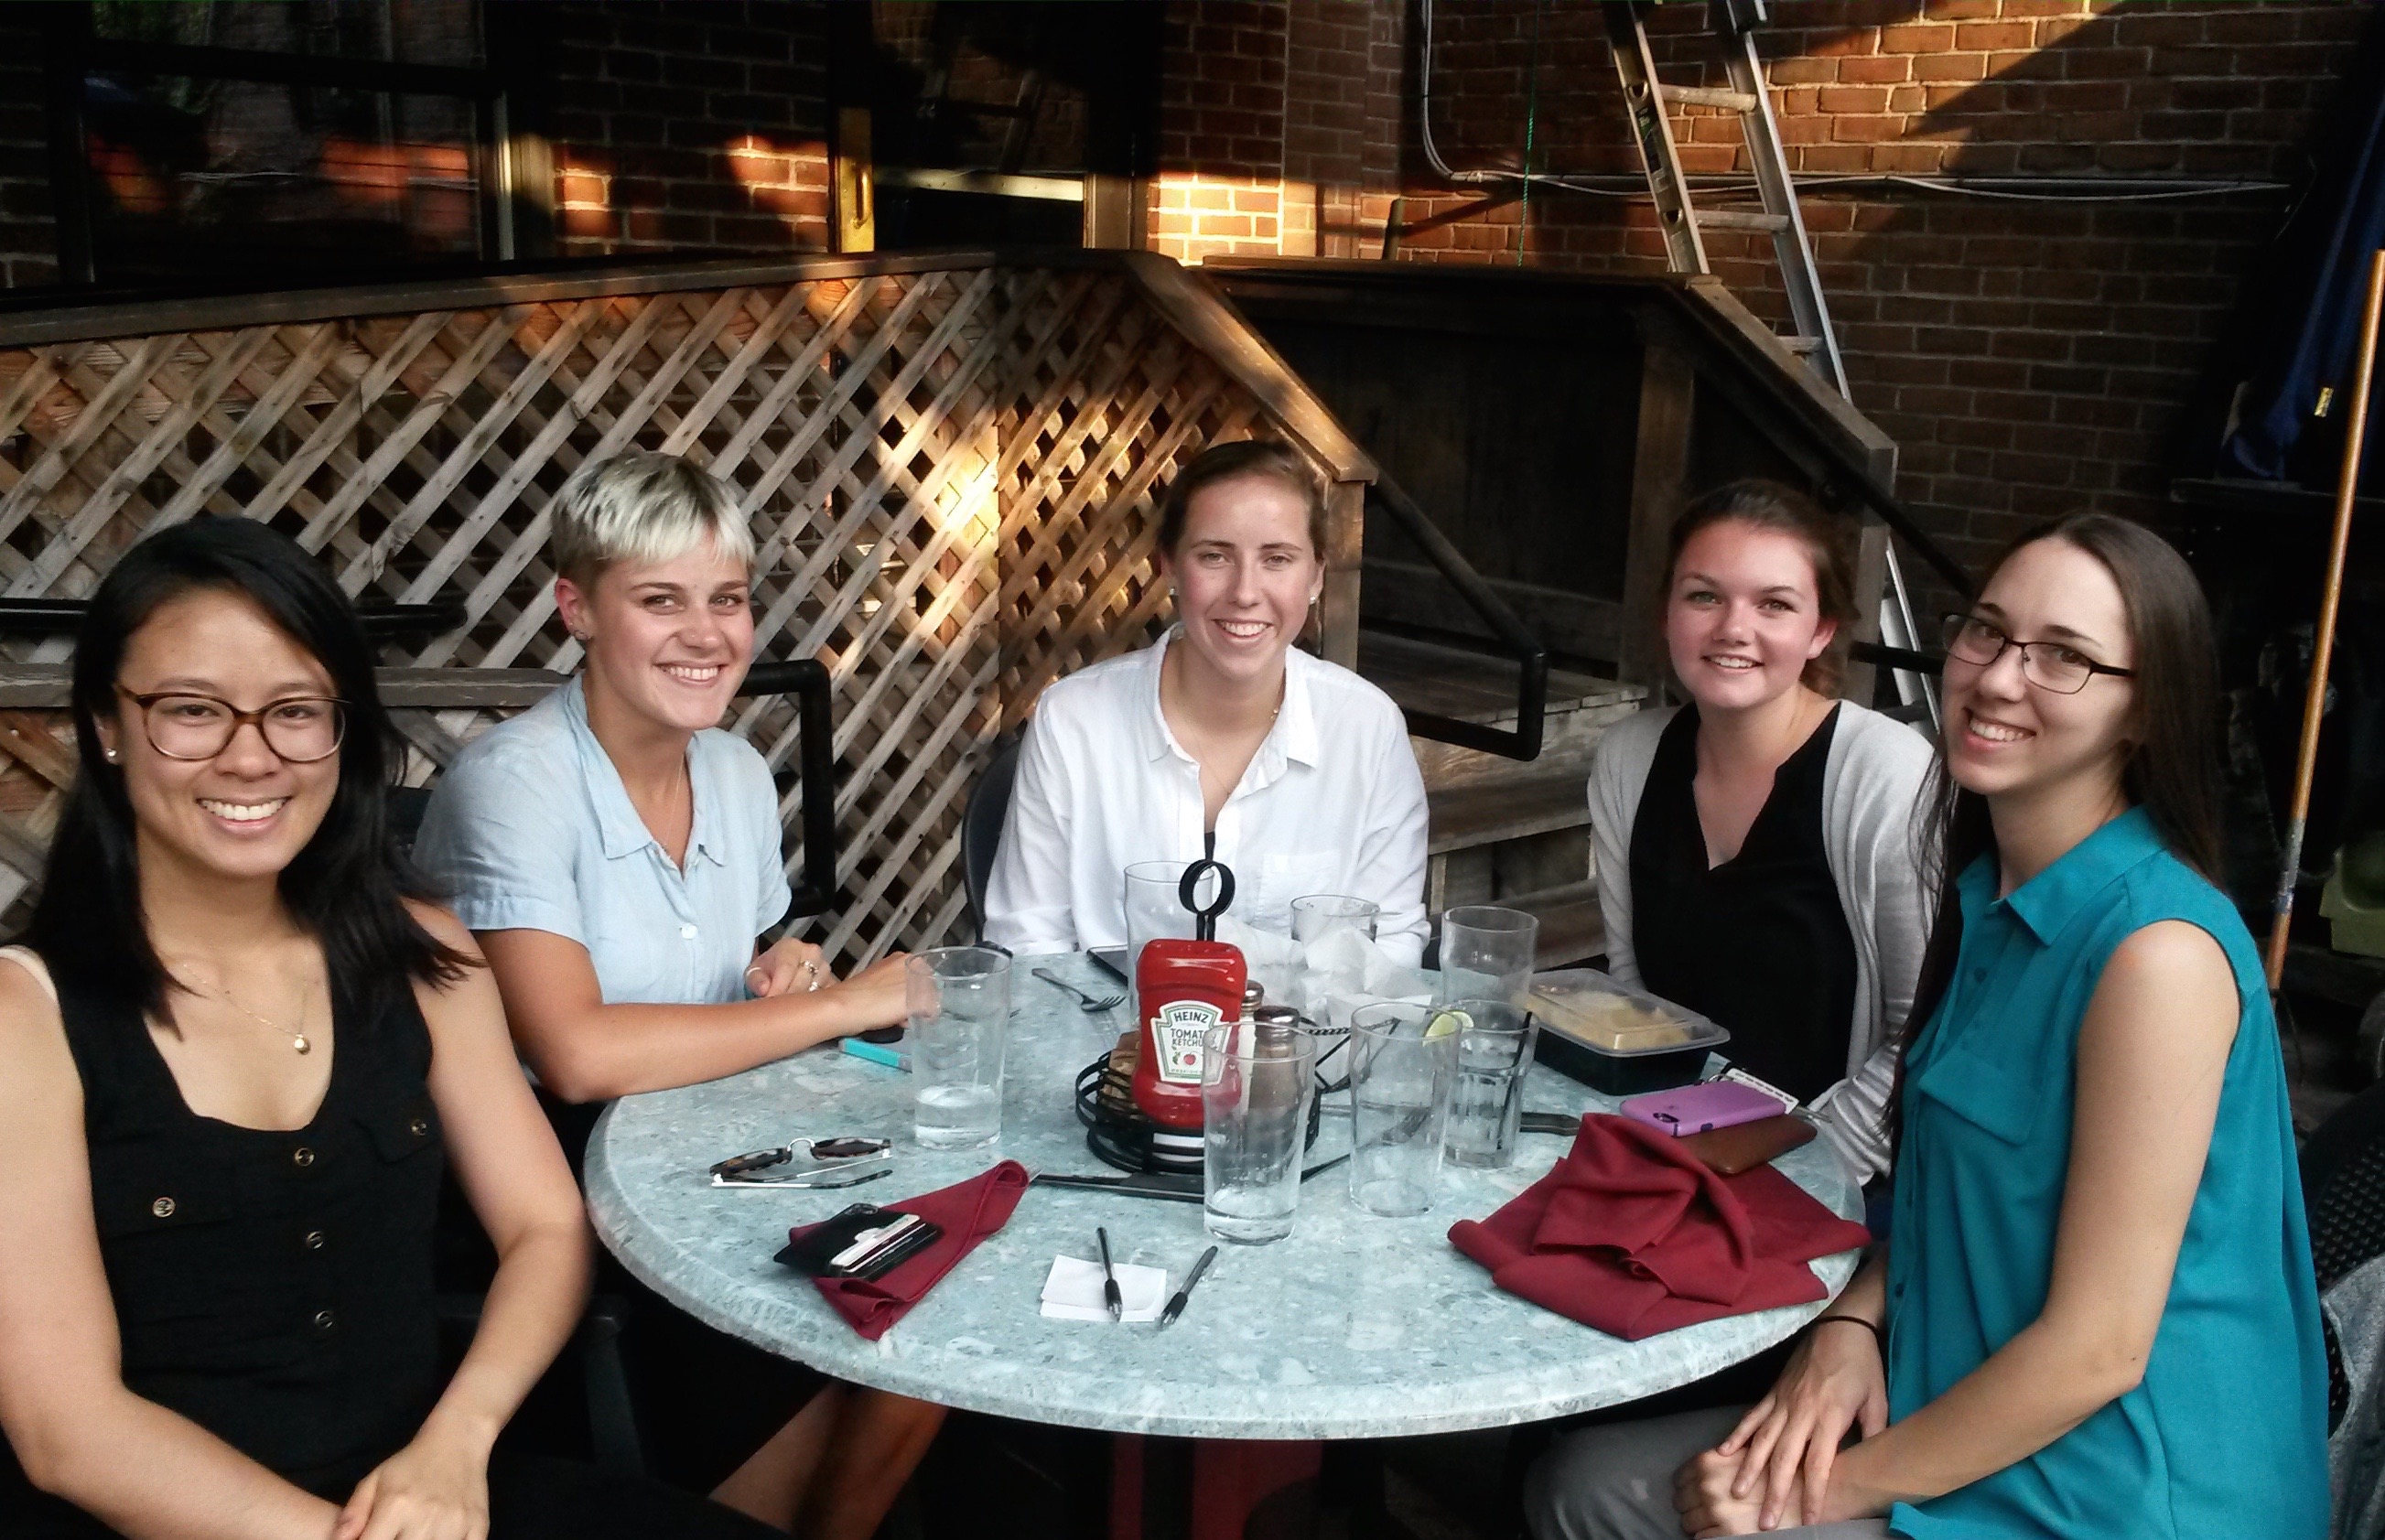 Lab dinner at Molly's Restaurant, August 9, 2018